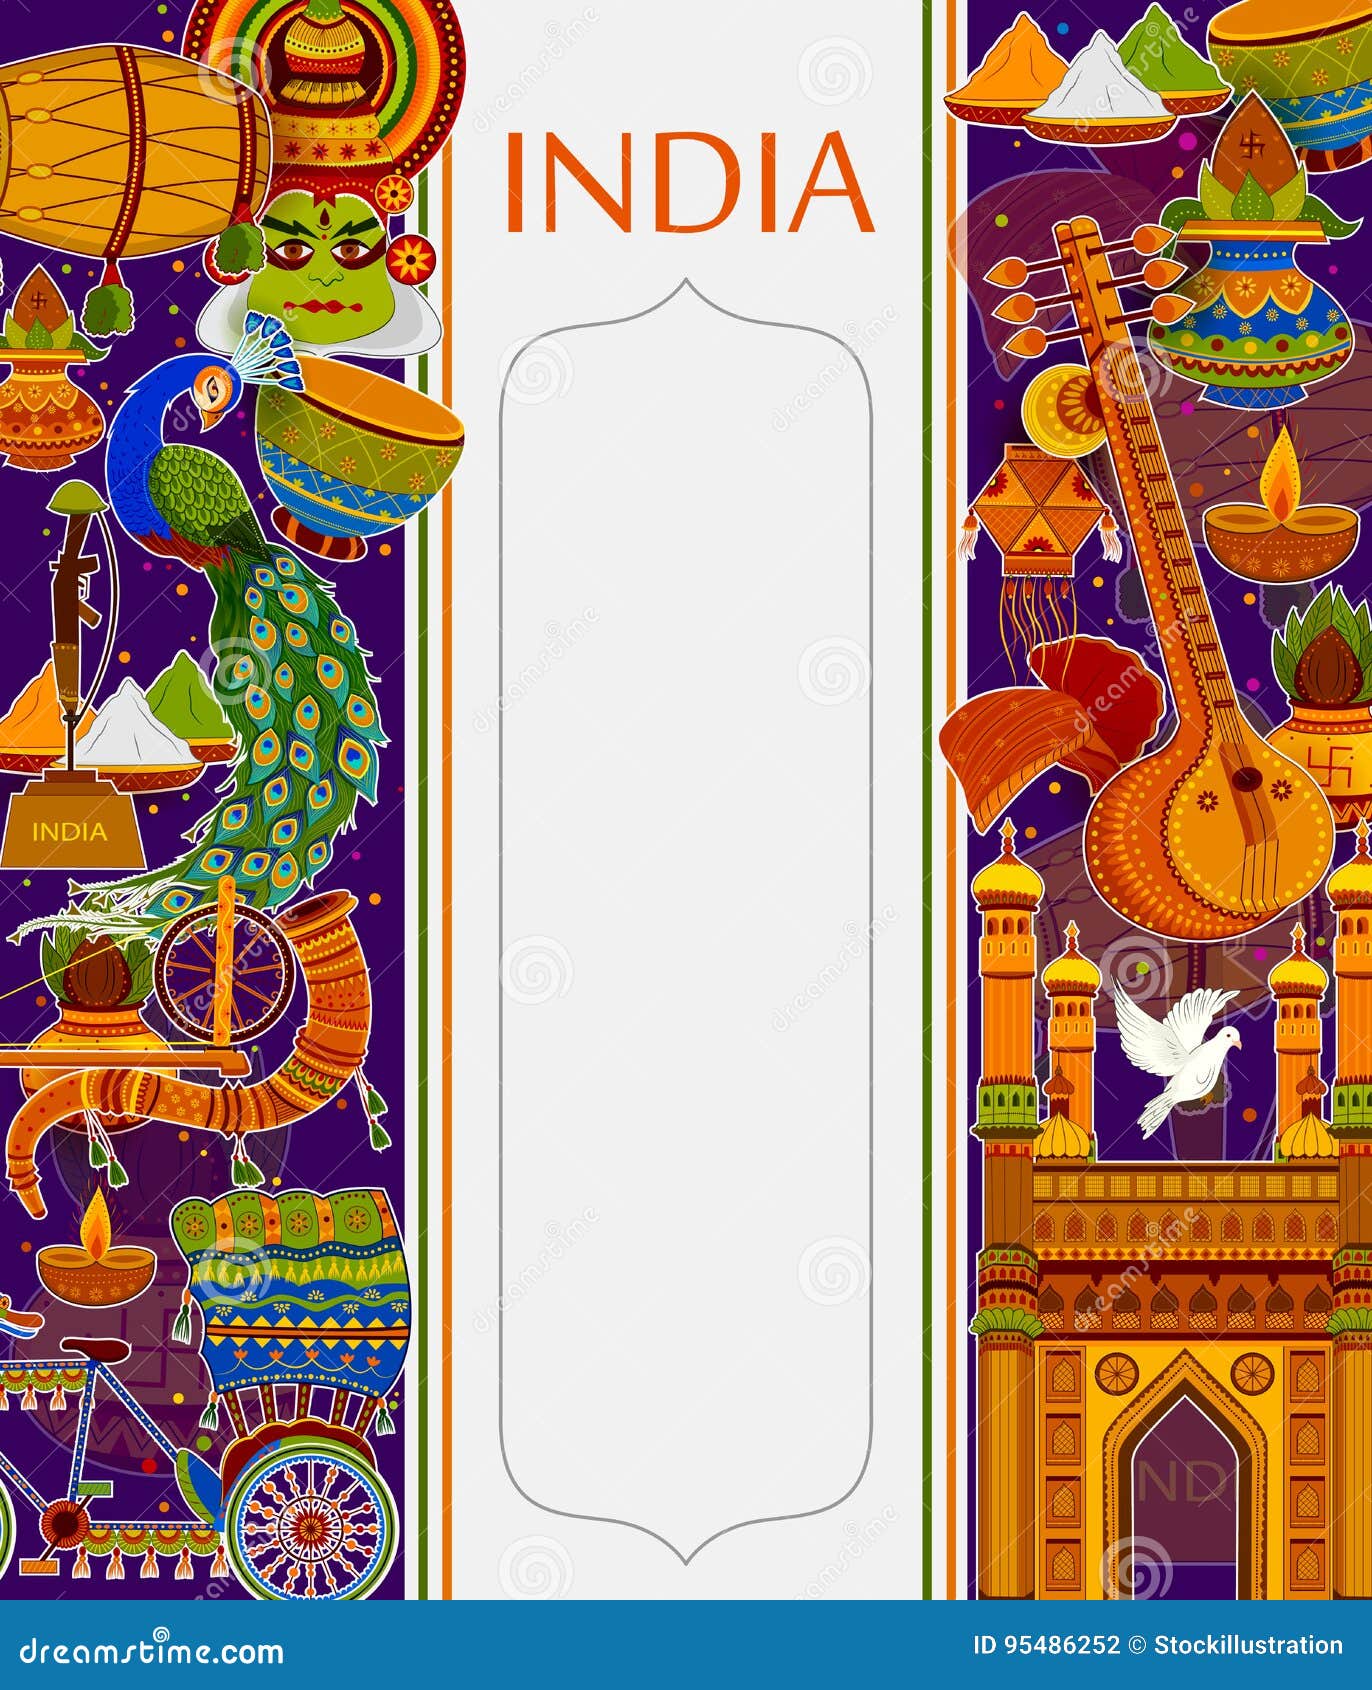 Incredible India Background Depicting Indian Colorful Culture and Religion  Stock Vector - Illustration of january, freedom: 95486252